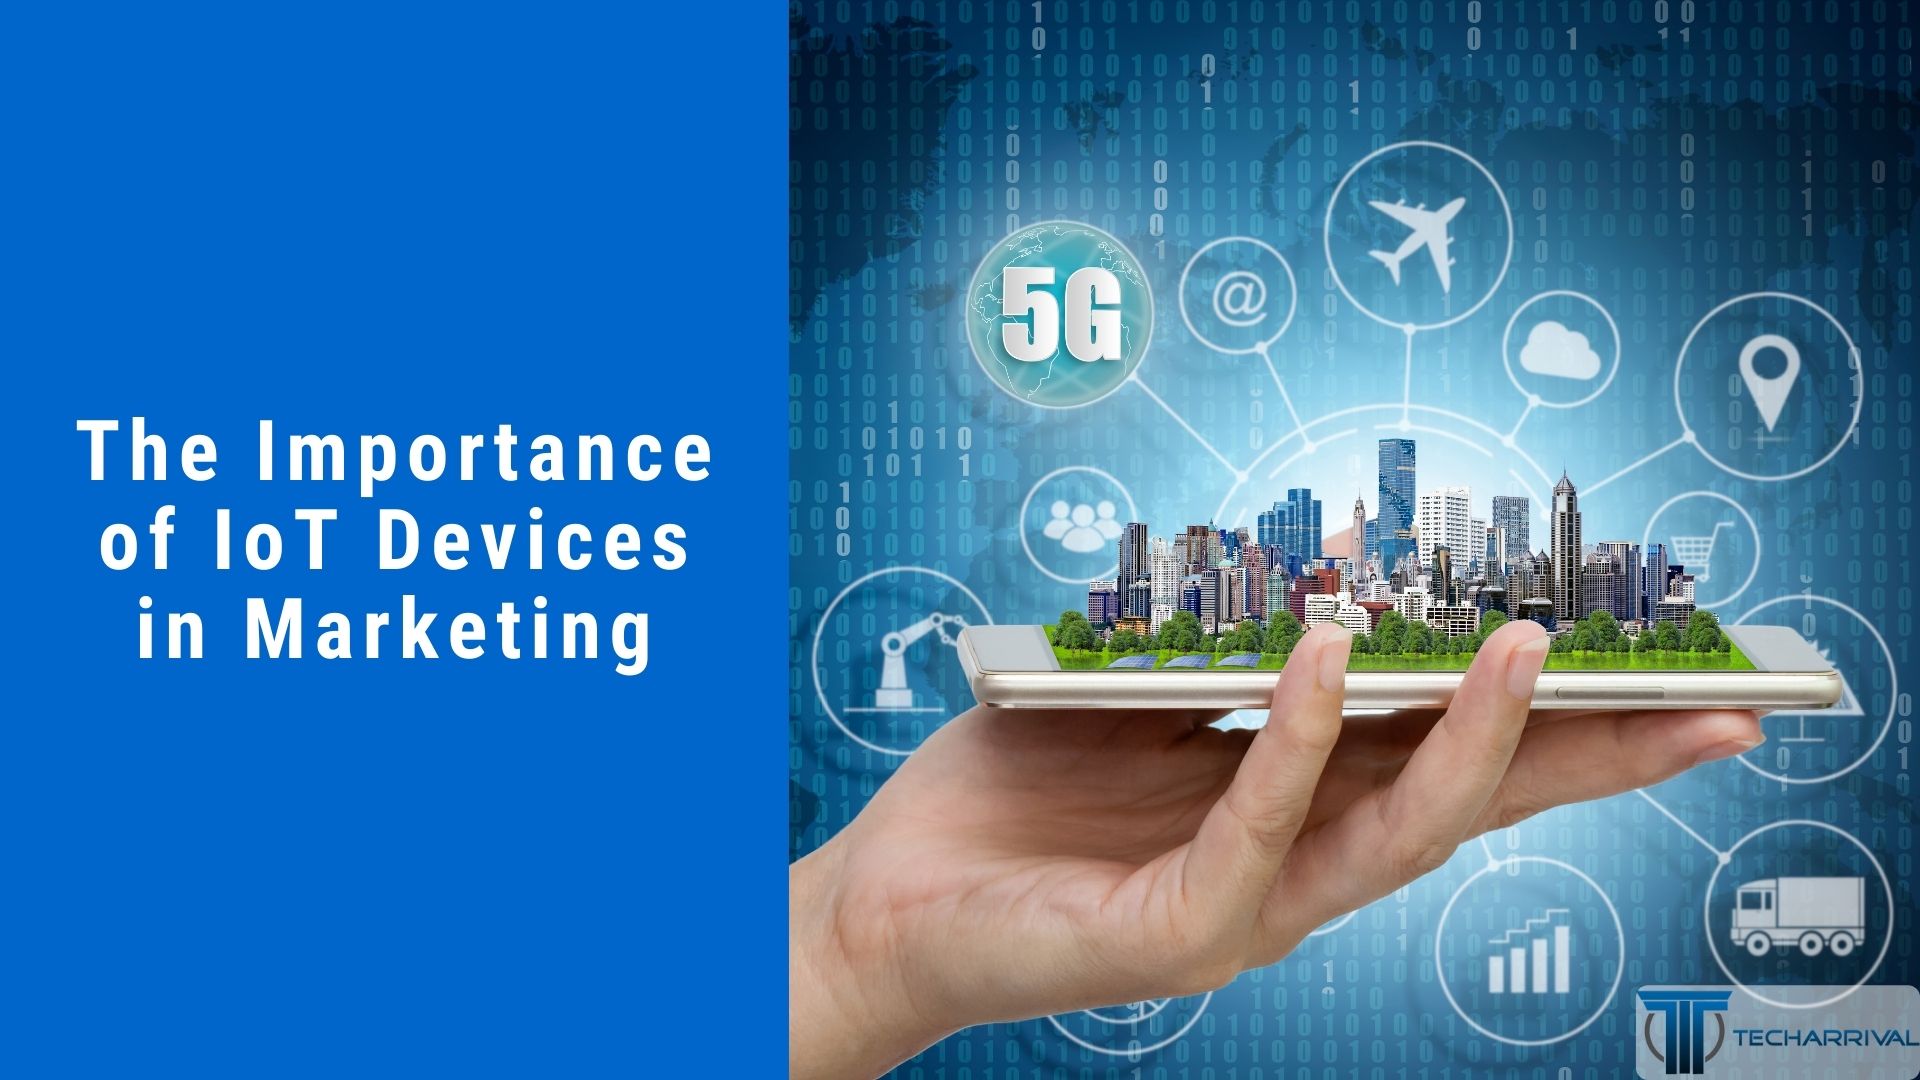 The Importance of IoT Devices in Marketing